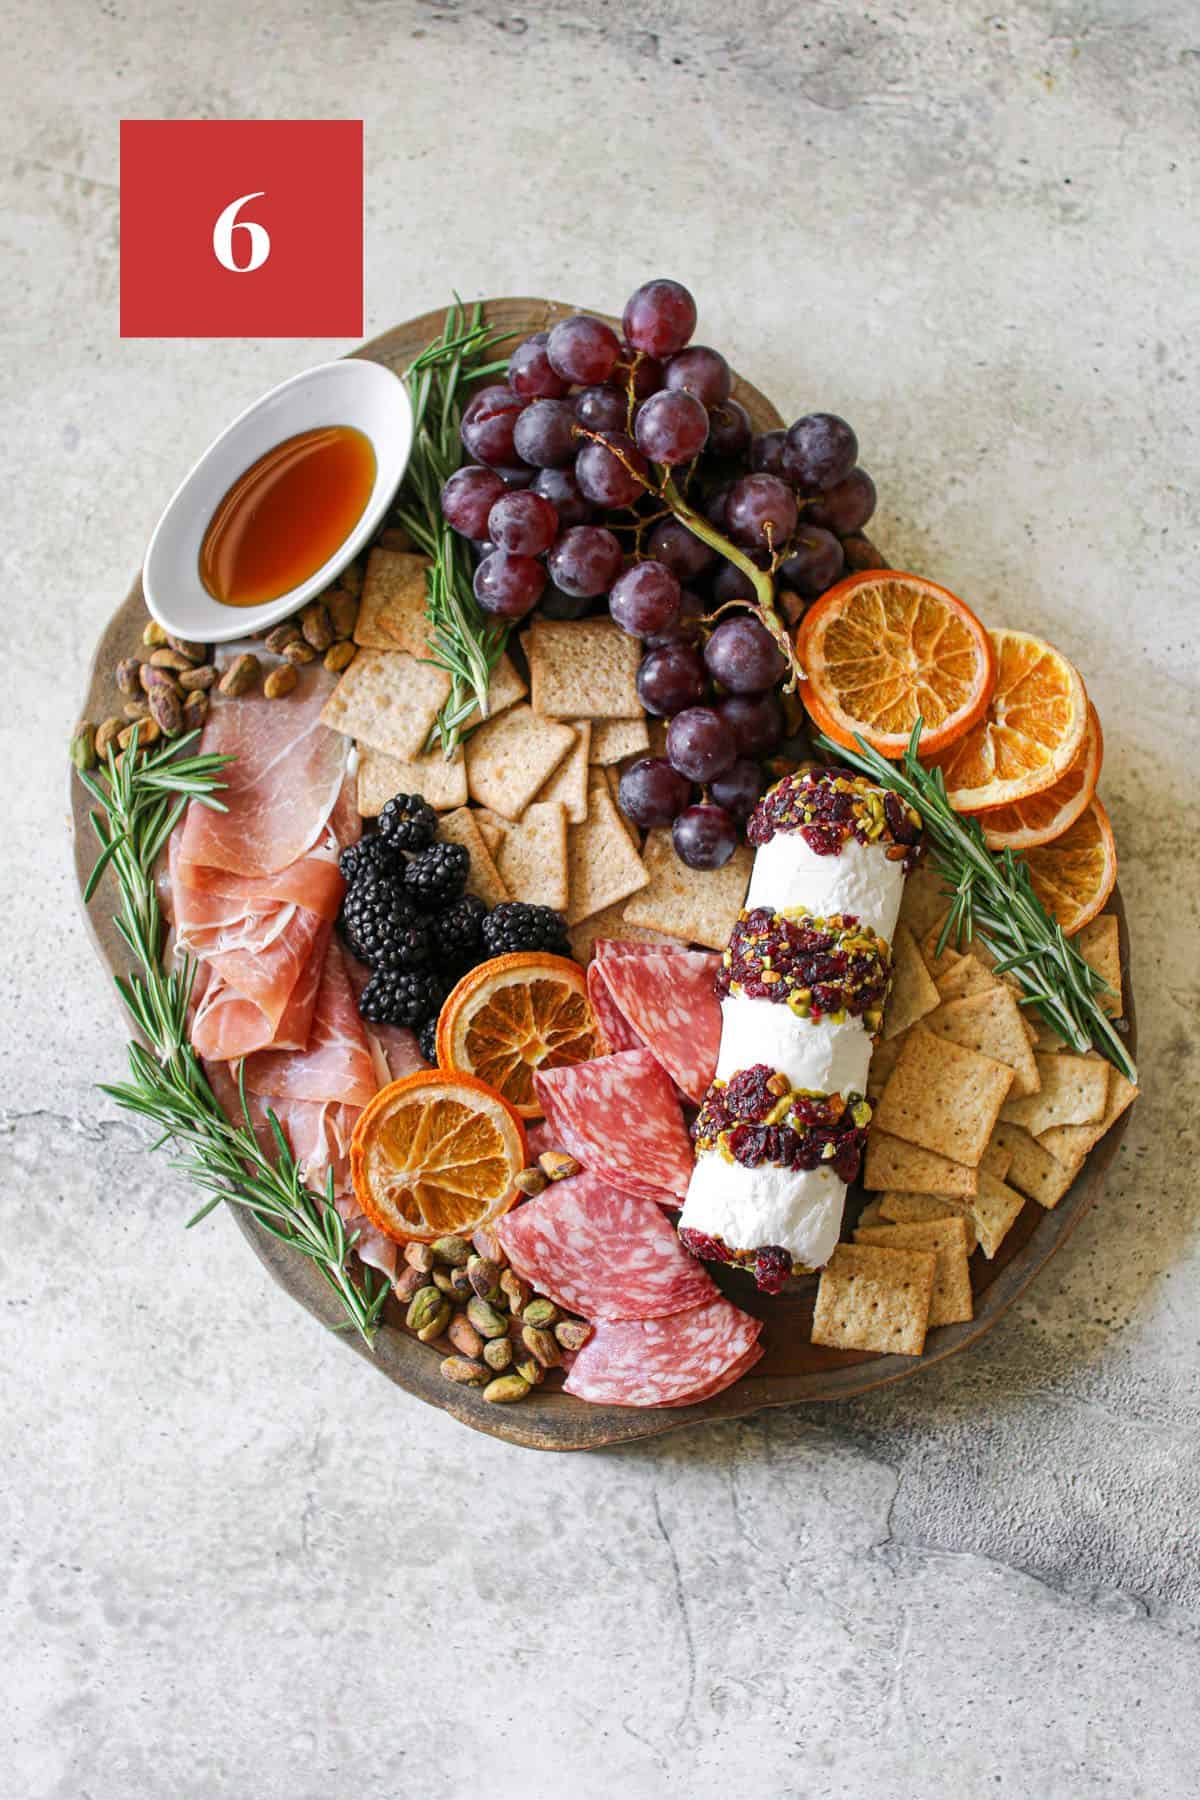 Overhead of a charcuterie board with on a wood trunk platter with a Cranberry Pistachio Cheese Log surrounded by crackers, grapes, meats and garnished with dried oranges and fresh rosemary. It sits on a stone background. In the upper left corner is a dark red square with a white '6' in the center.